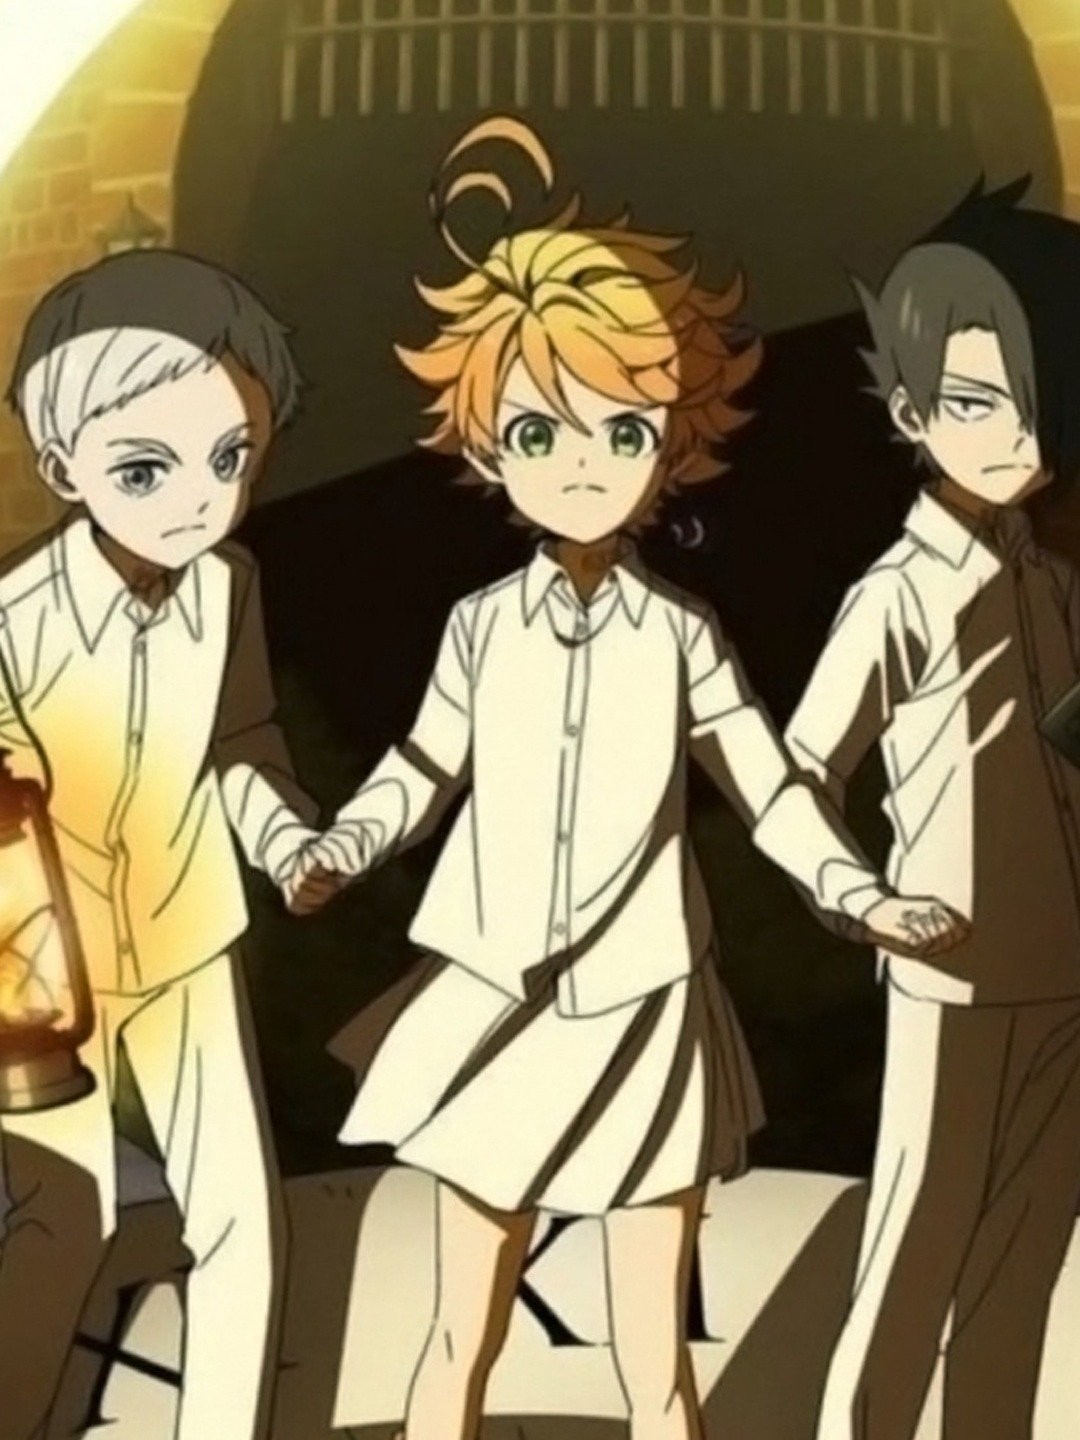 The Promised Neverland: 10 Reasons Why It's A Must-Watch Anime Series